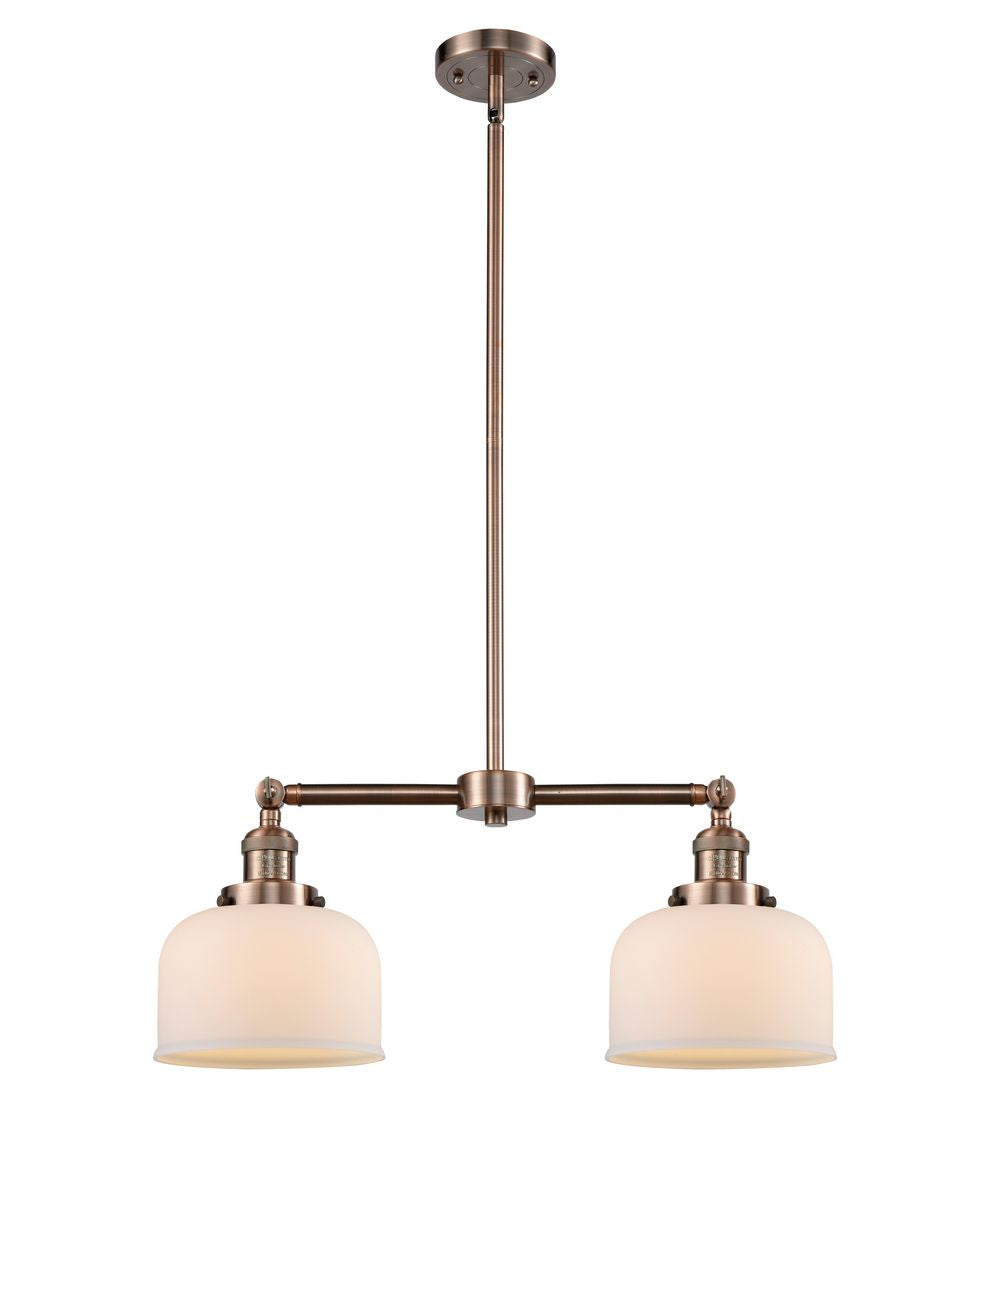 209-AC-G71 2-Light 21" Antique Copper Island Light - Matte White Cased Large Bell Glass - LED Bulb - Dimmensions: 21 x 5 x 10<br>Minimum Height : 20.875<br>Maximum Height : 44.875 - Sloped Ceiling Compatible: Yes